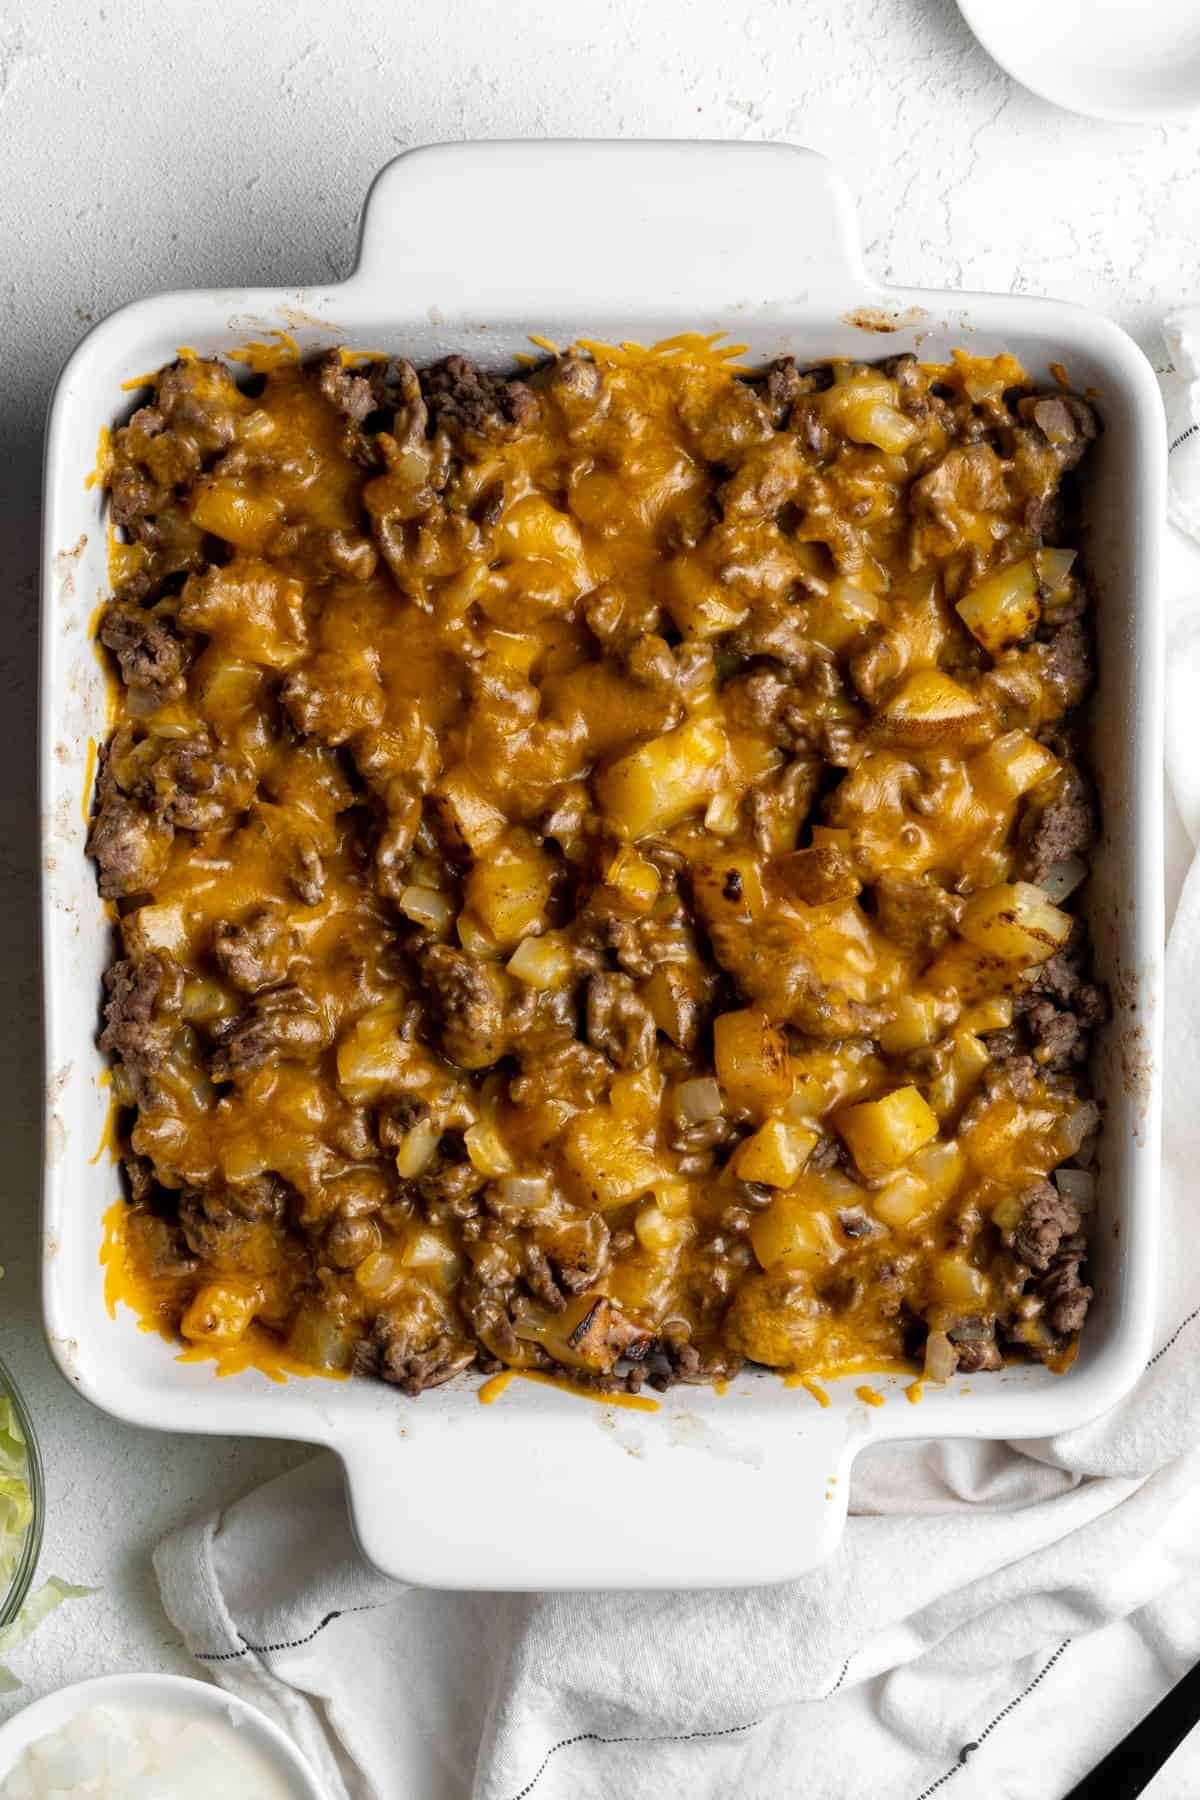 Big mac casserole topped with melted cheese.